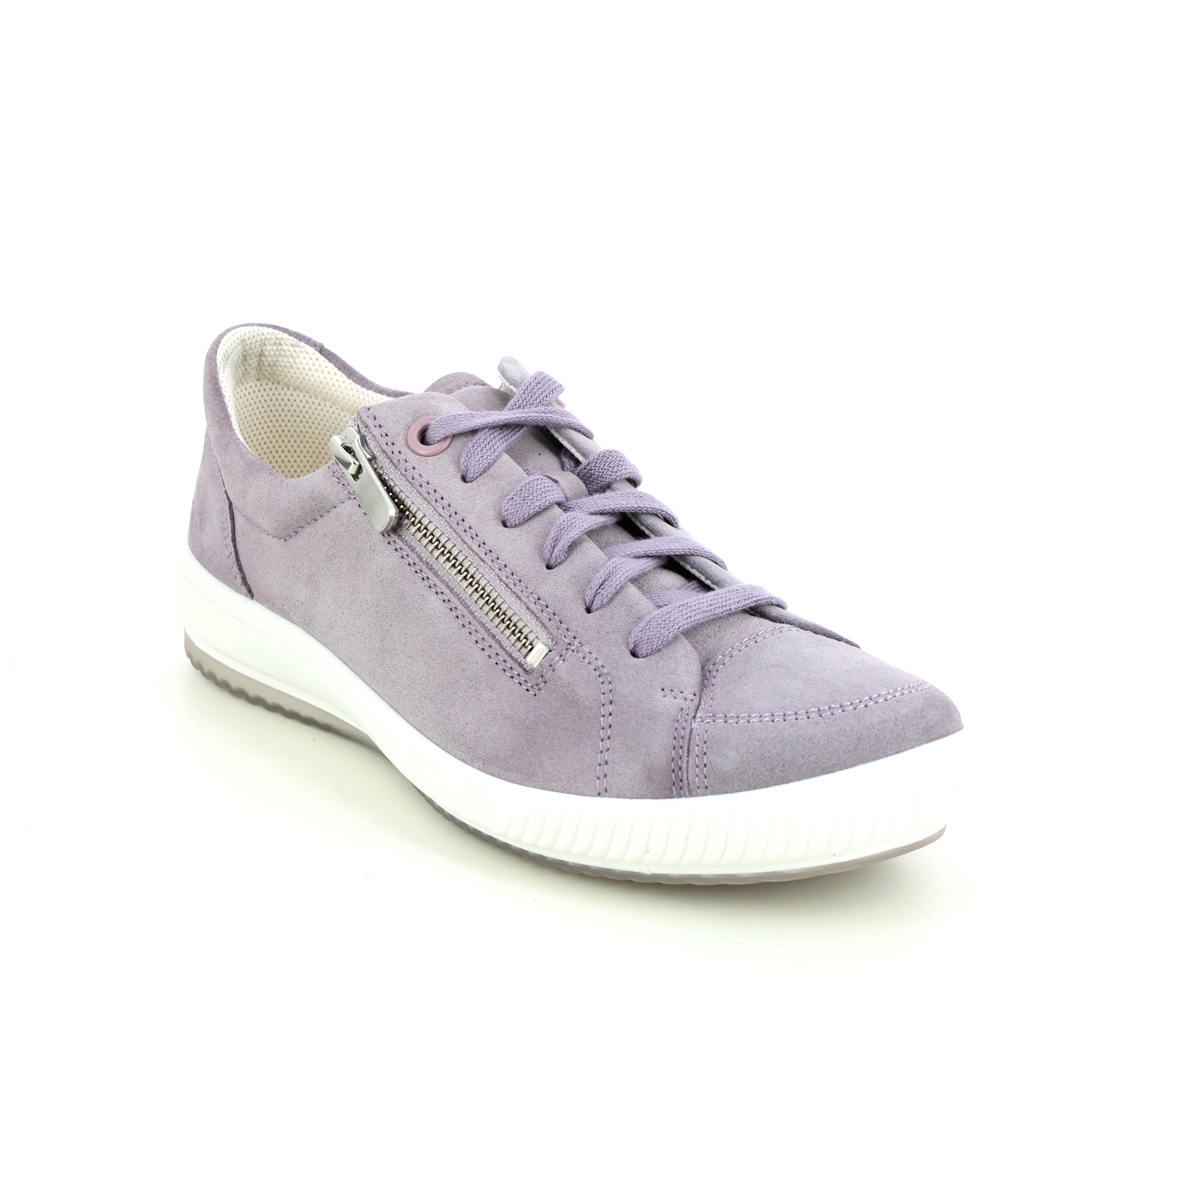 Legero Tanaro 5 Zip Lilac Womens Lacing Shoes 2000162-8530 In Size 6 In Plain Lilac